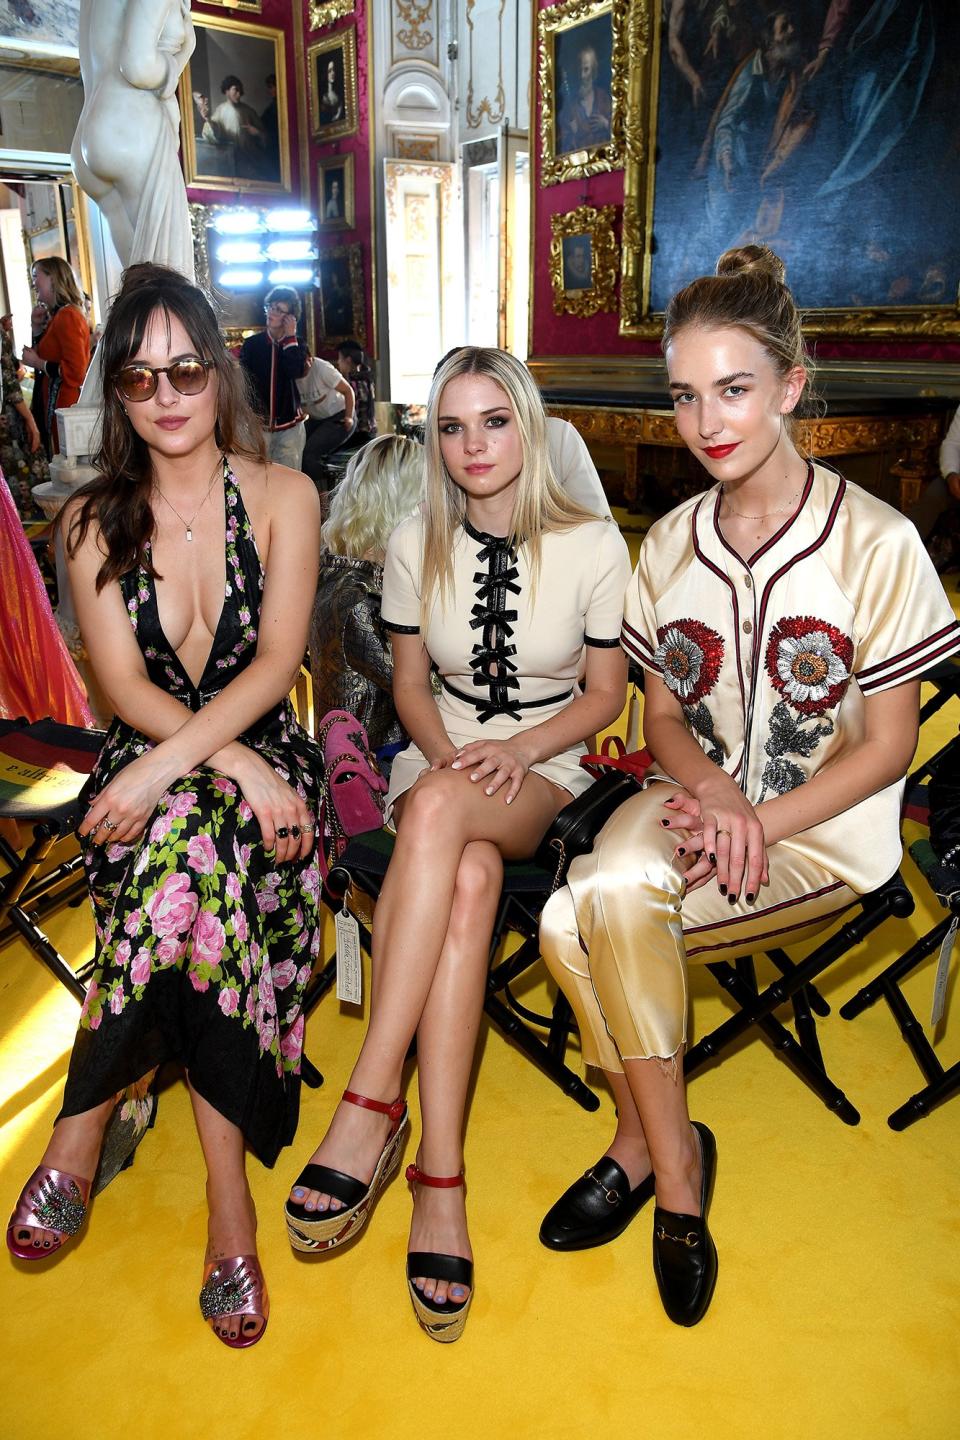 The <em>Fifty Shades Darker</em> actress sat front row at the Gucci Cruise show in Florence, Italy with her two half-sisters: Stella Banderas-Griffith — daughter of Johnson's mom Melanie Griffith and her ex-husband Antonio Banderas — and Grace Johnson — daughter of Johnson's dad Don Johnson and his current wife Kelley Phleger. There may be four different parents among the three, but it's clear that good looks run in the <em>entire</em> family.